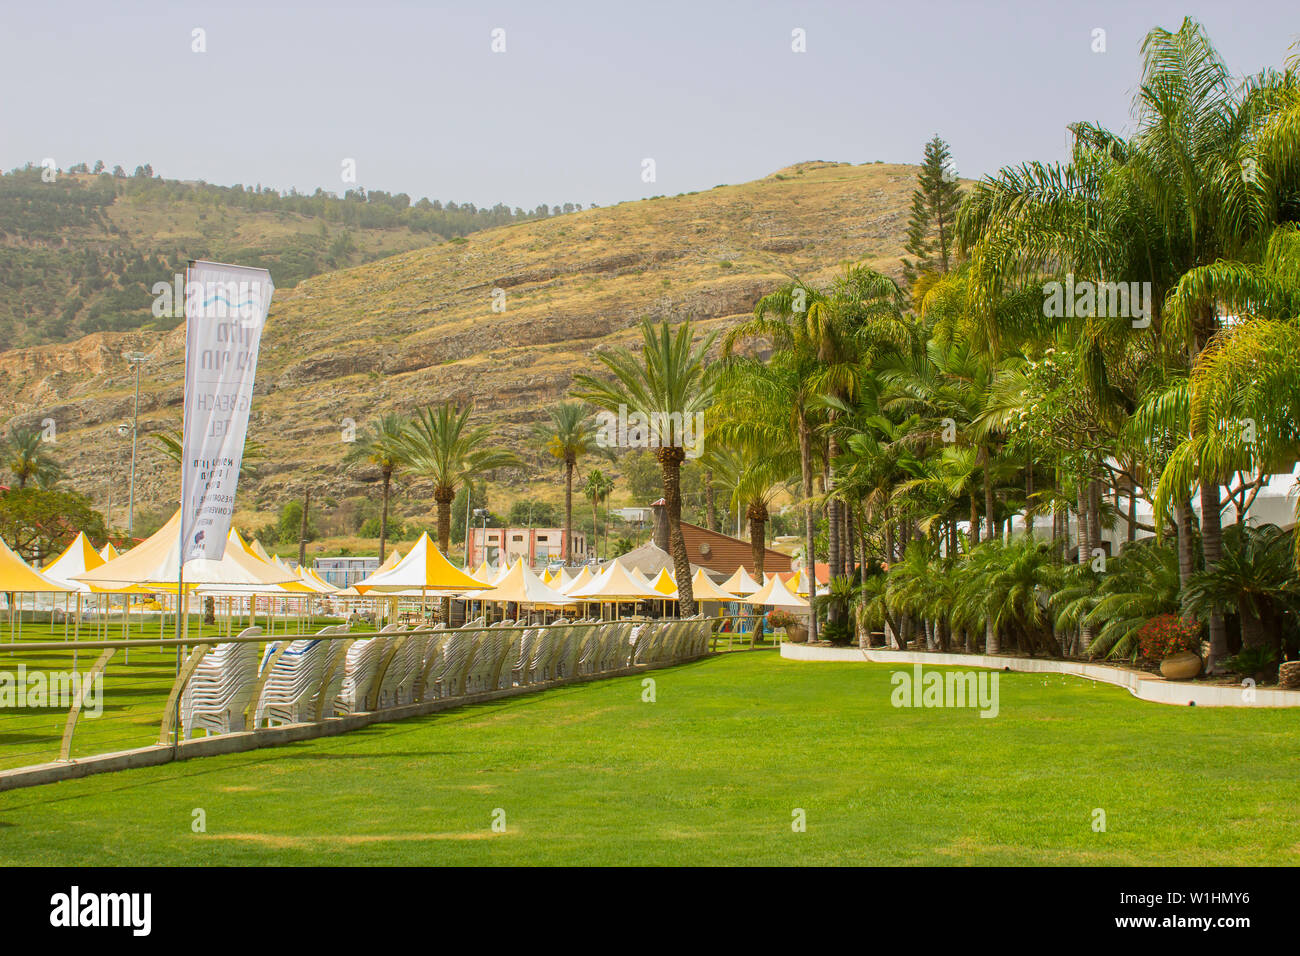 3 May 2018 Part of the grounds and lawn of The Gai Beach Hotel in Capernaum Israel. A popular tourist destination for pilgrims to the Holy Land Stock Photo